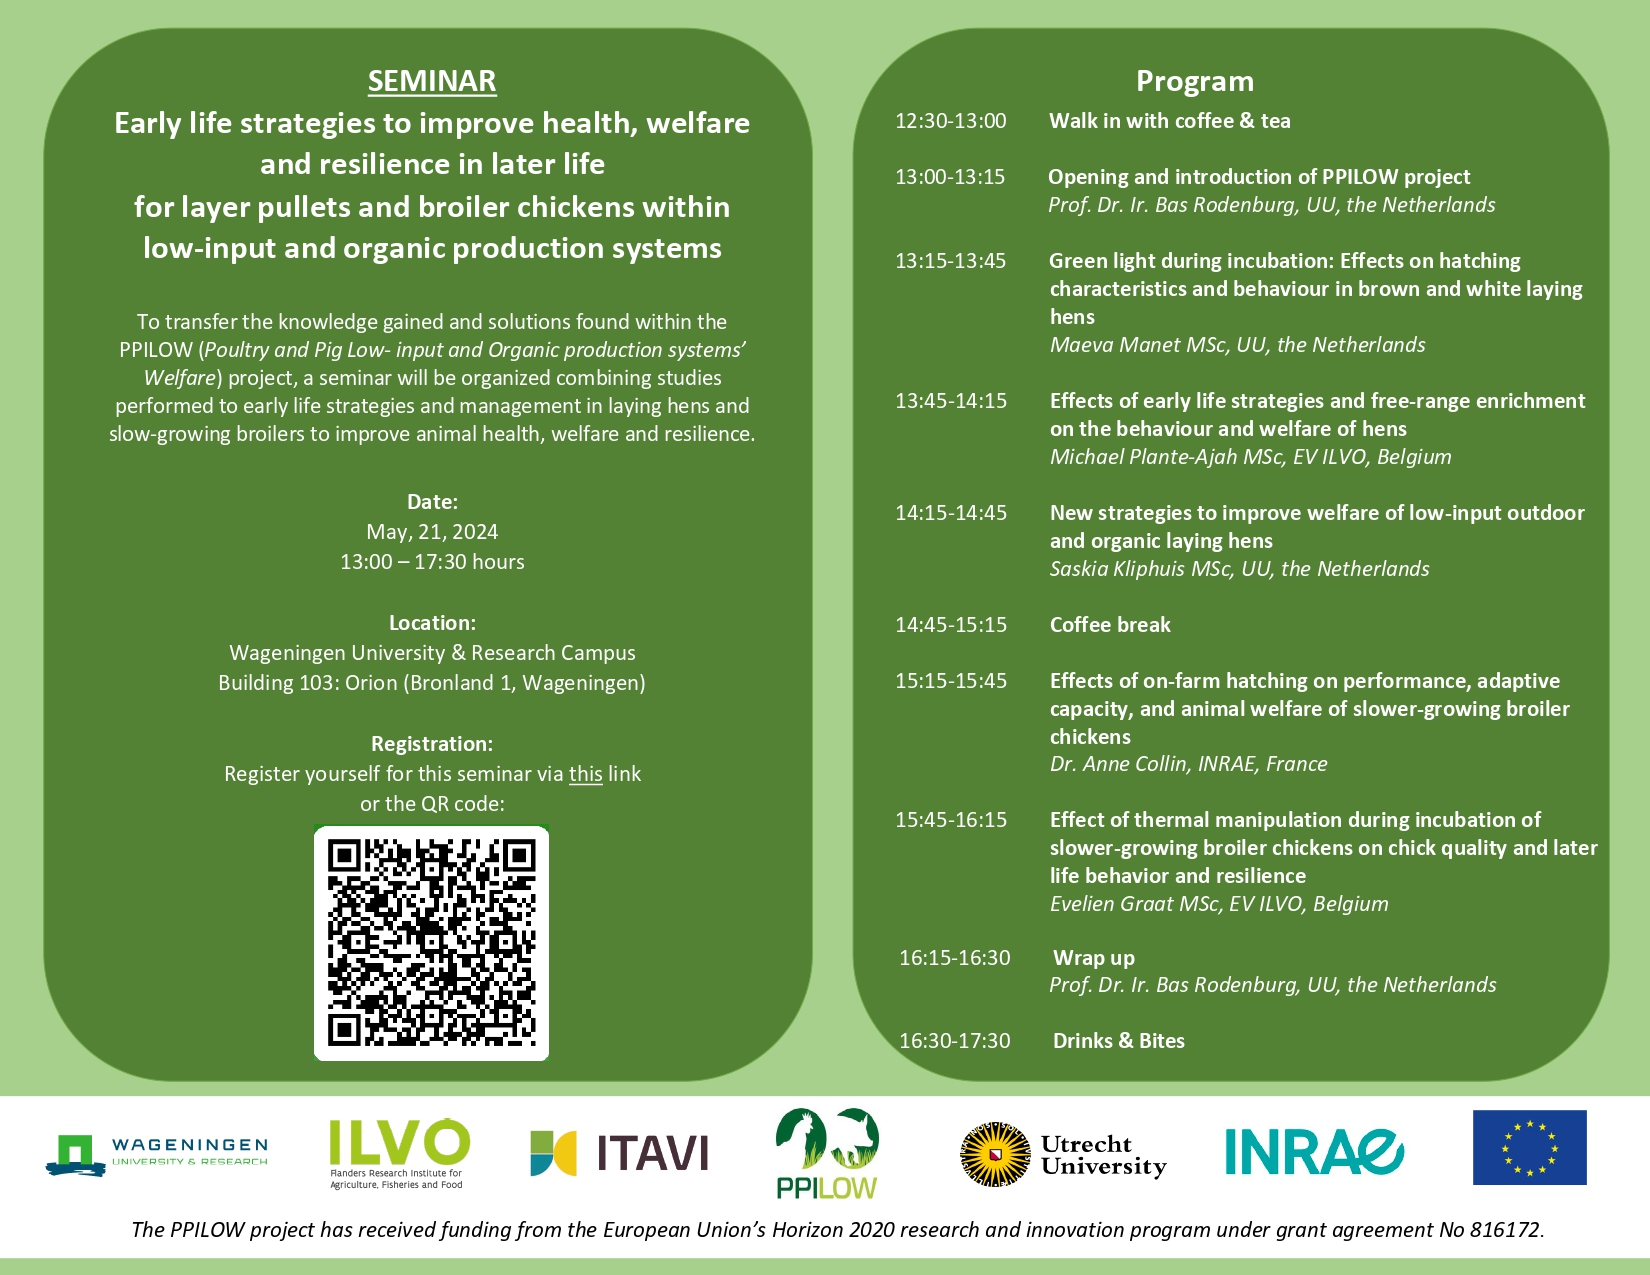 PPILOW seminar: Early life strategies to improve health, welfare and resilience in later life for layer pullets and broiler chickens within low-input and organic production systems